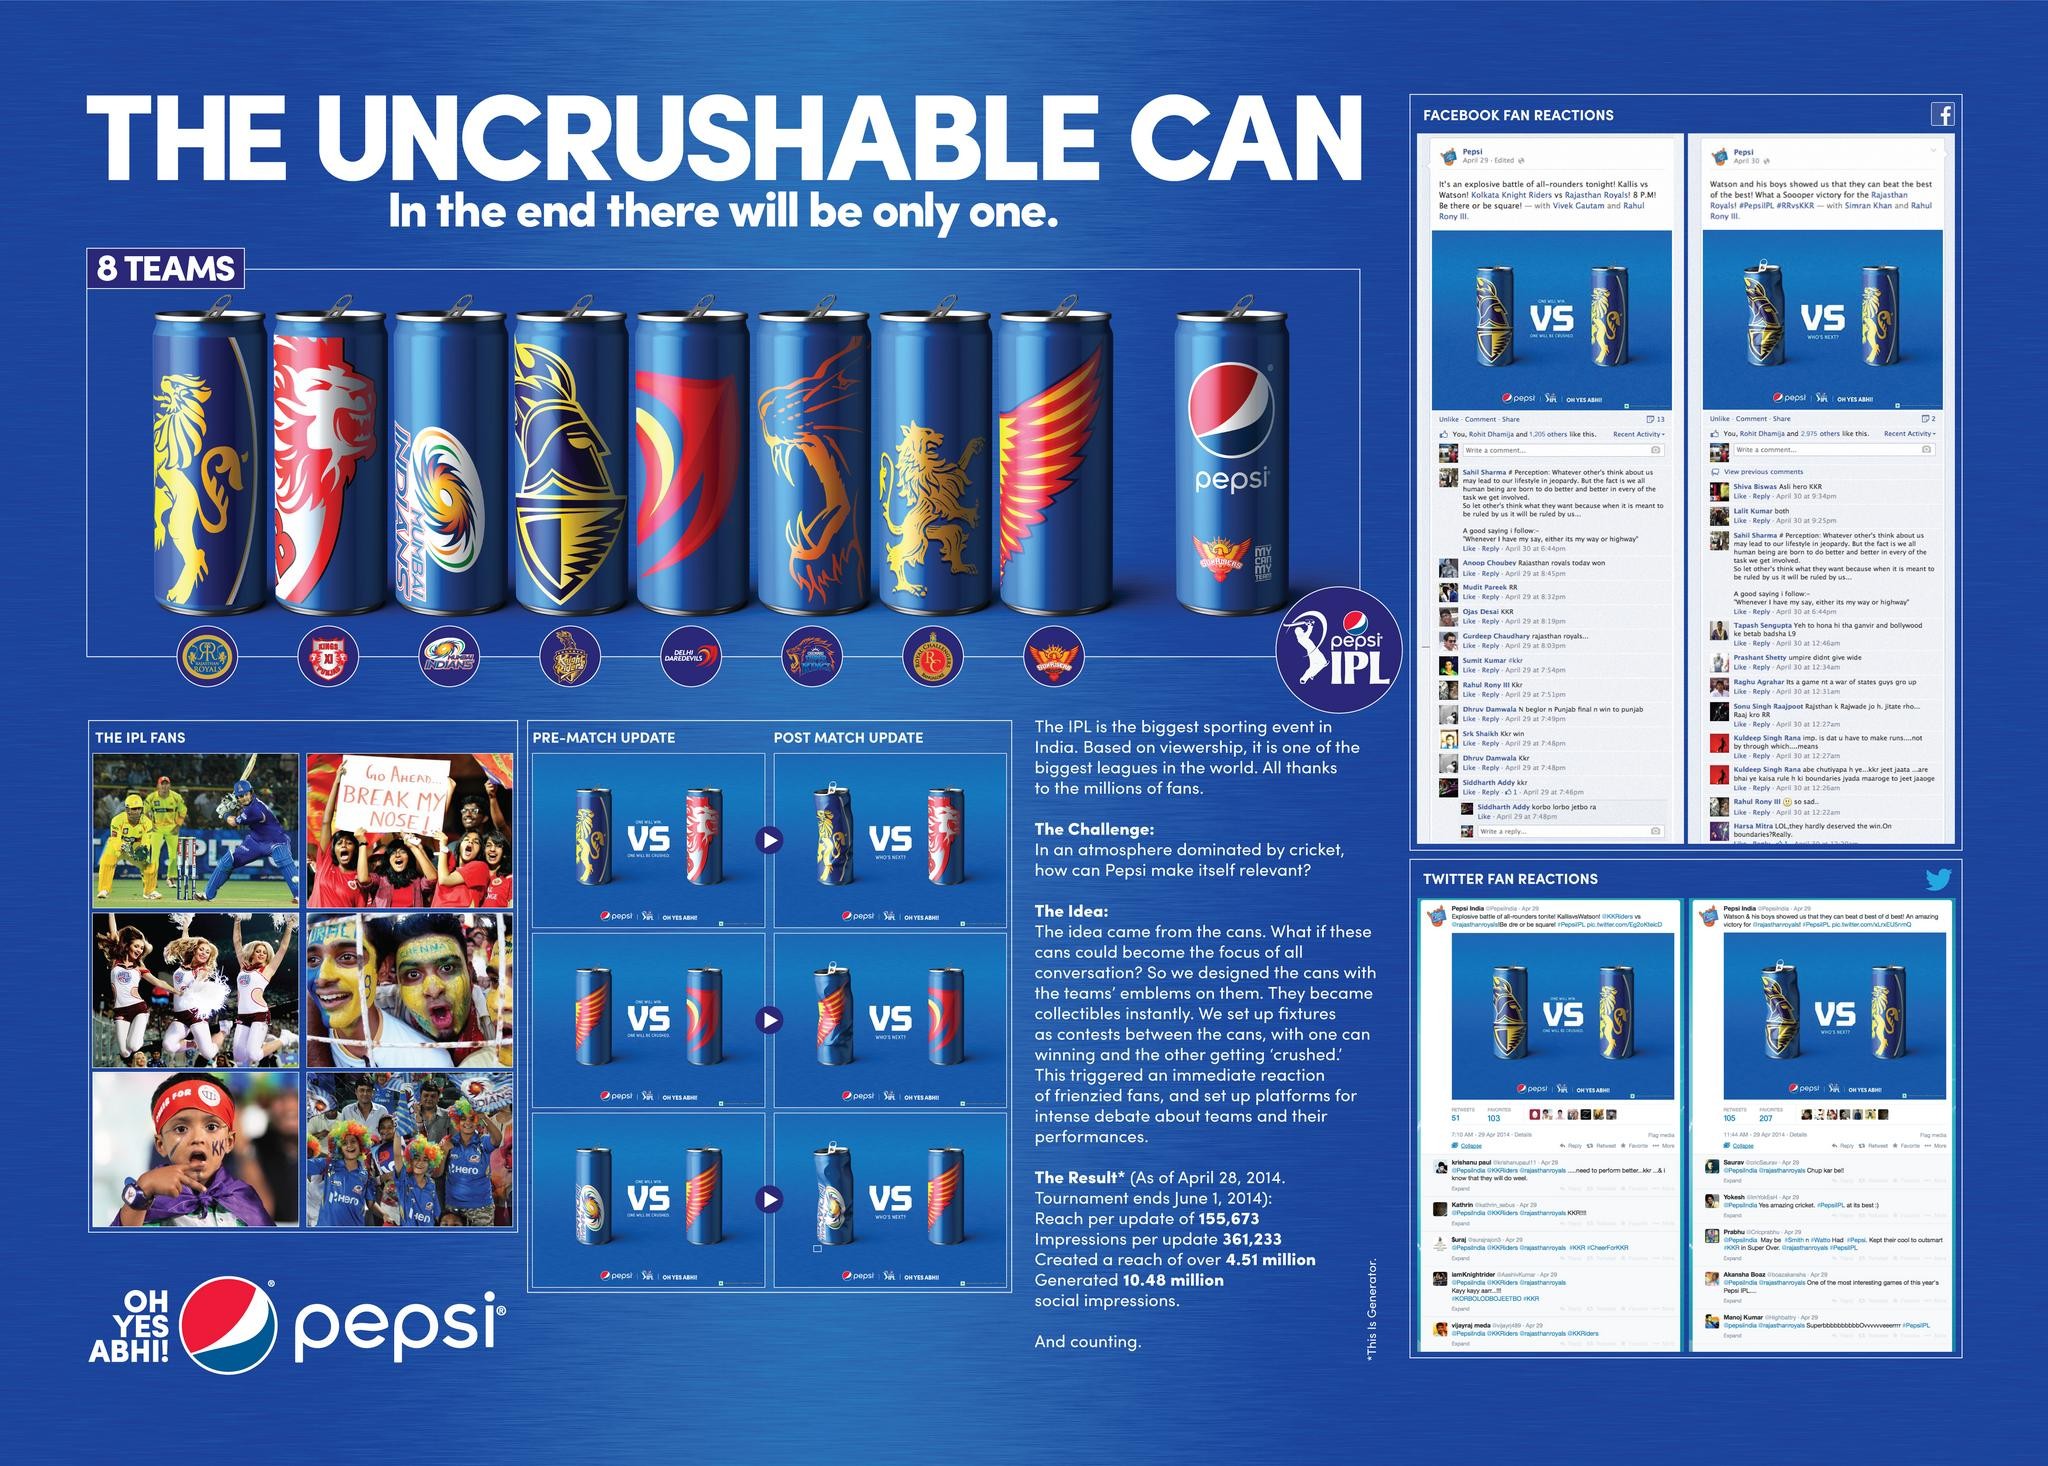 UNCRUSHABLE CAN